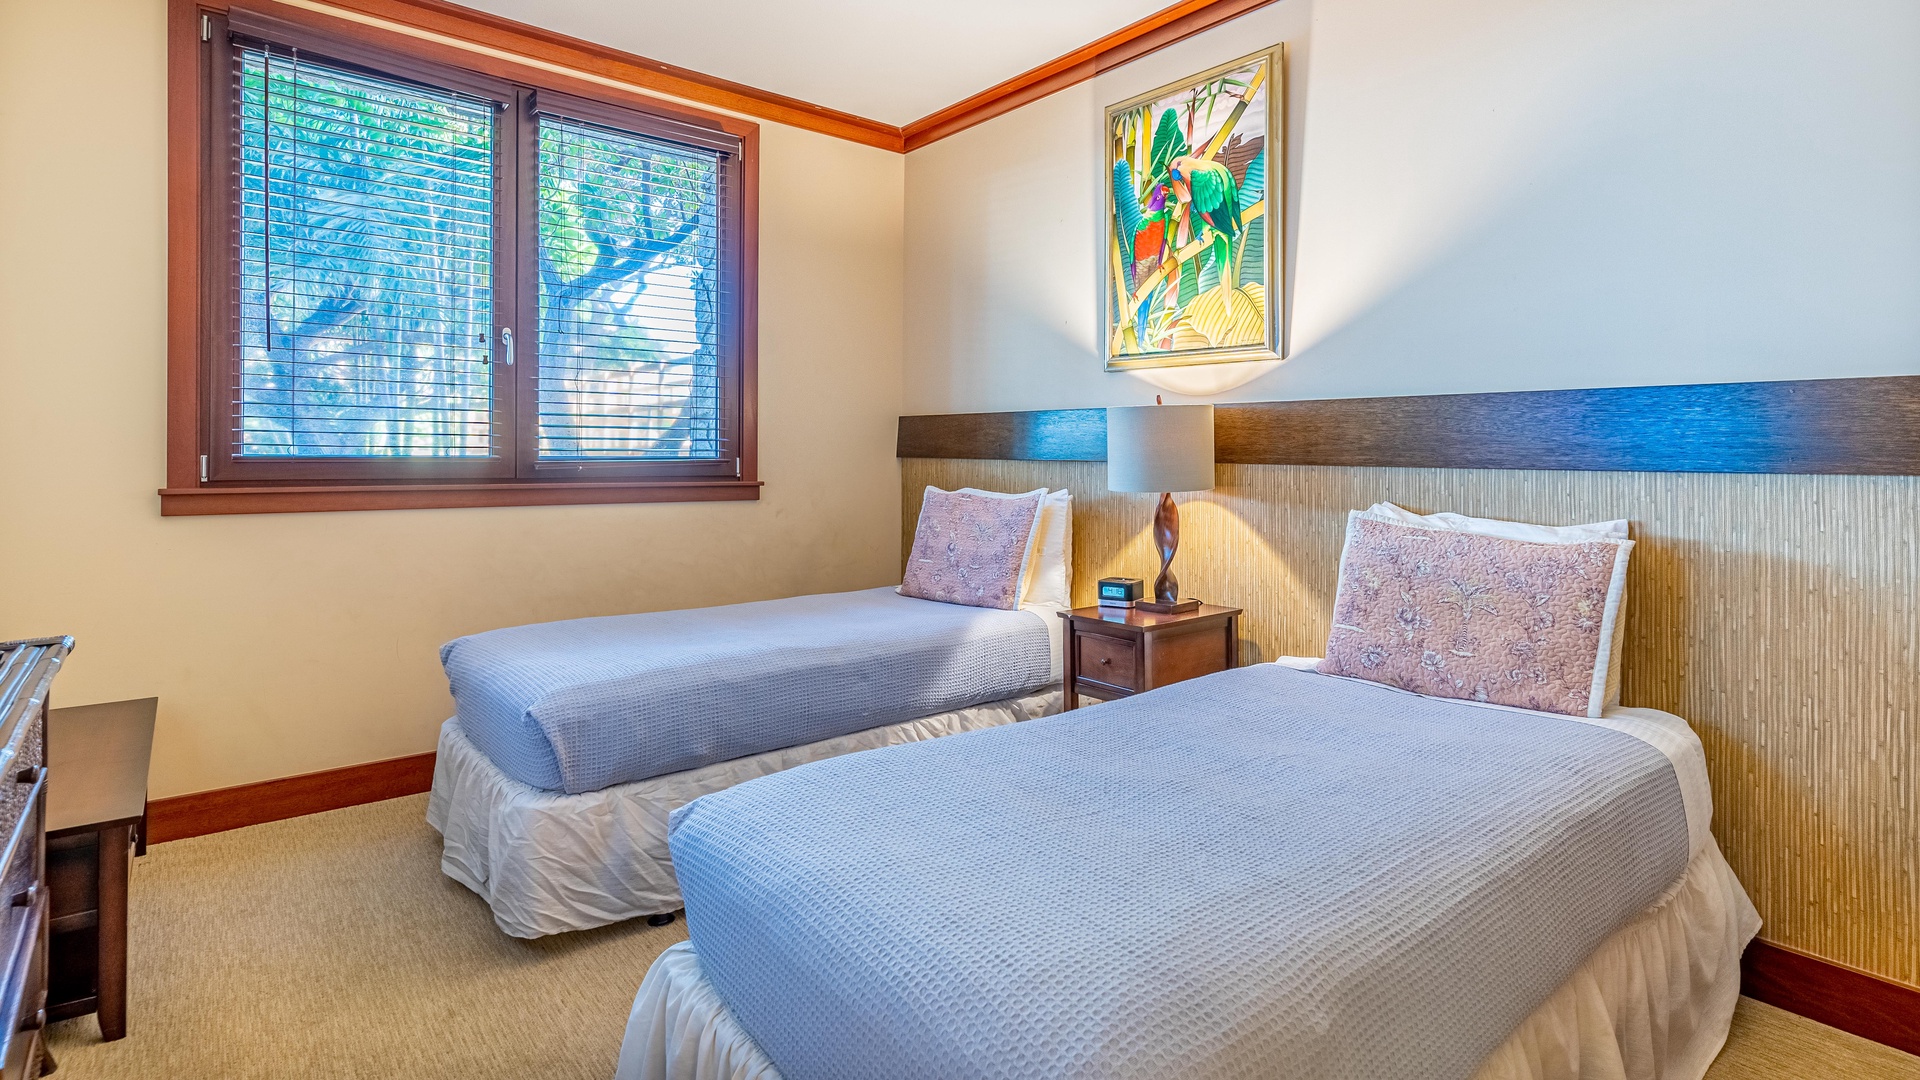 Kapolei Vacation Rentals, Ko Olina Beach Villas B102 - The second guest bedroom with twin beds, dresser, TV, and nightstand in the middle of both beds.